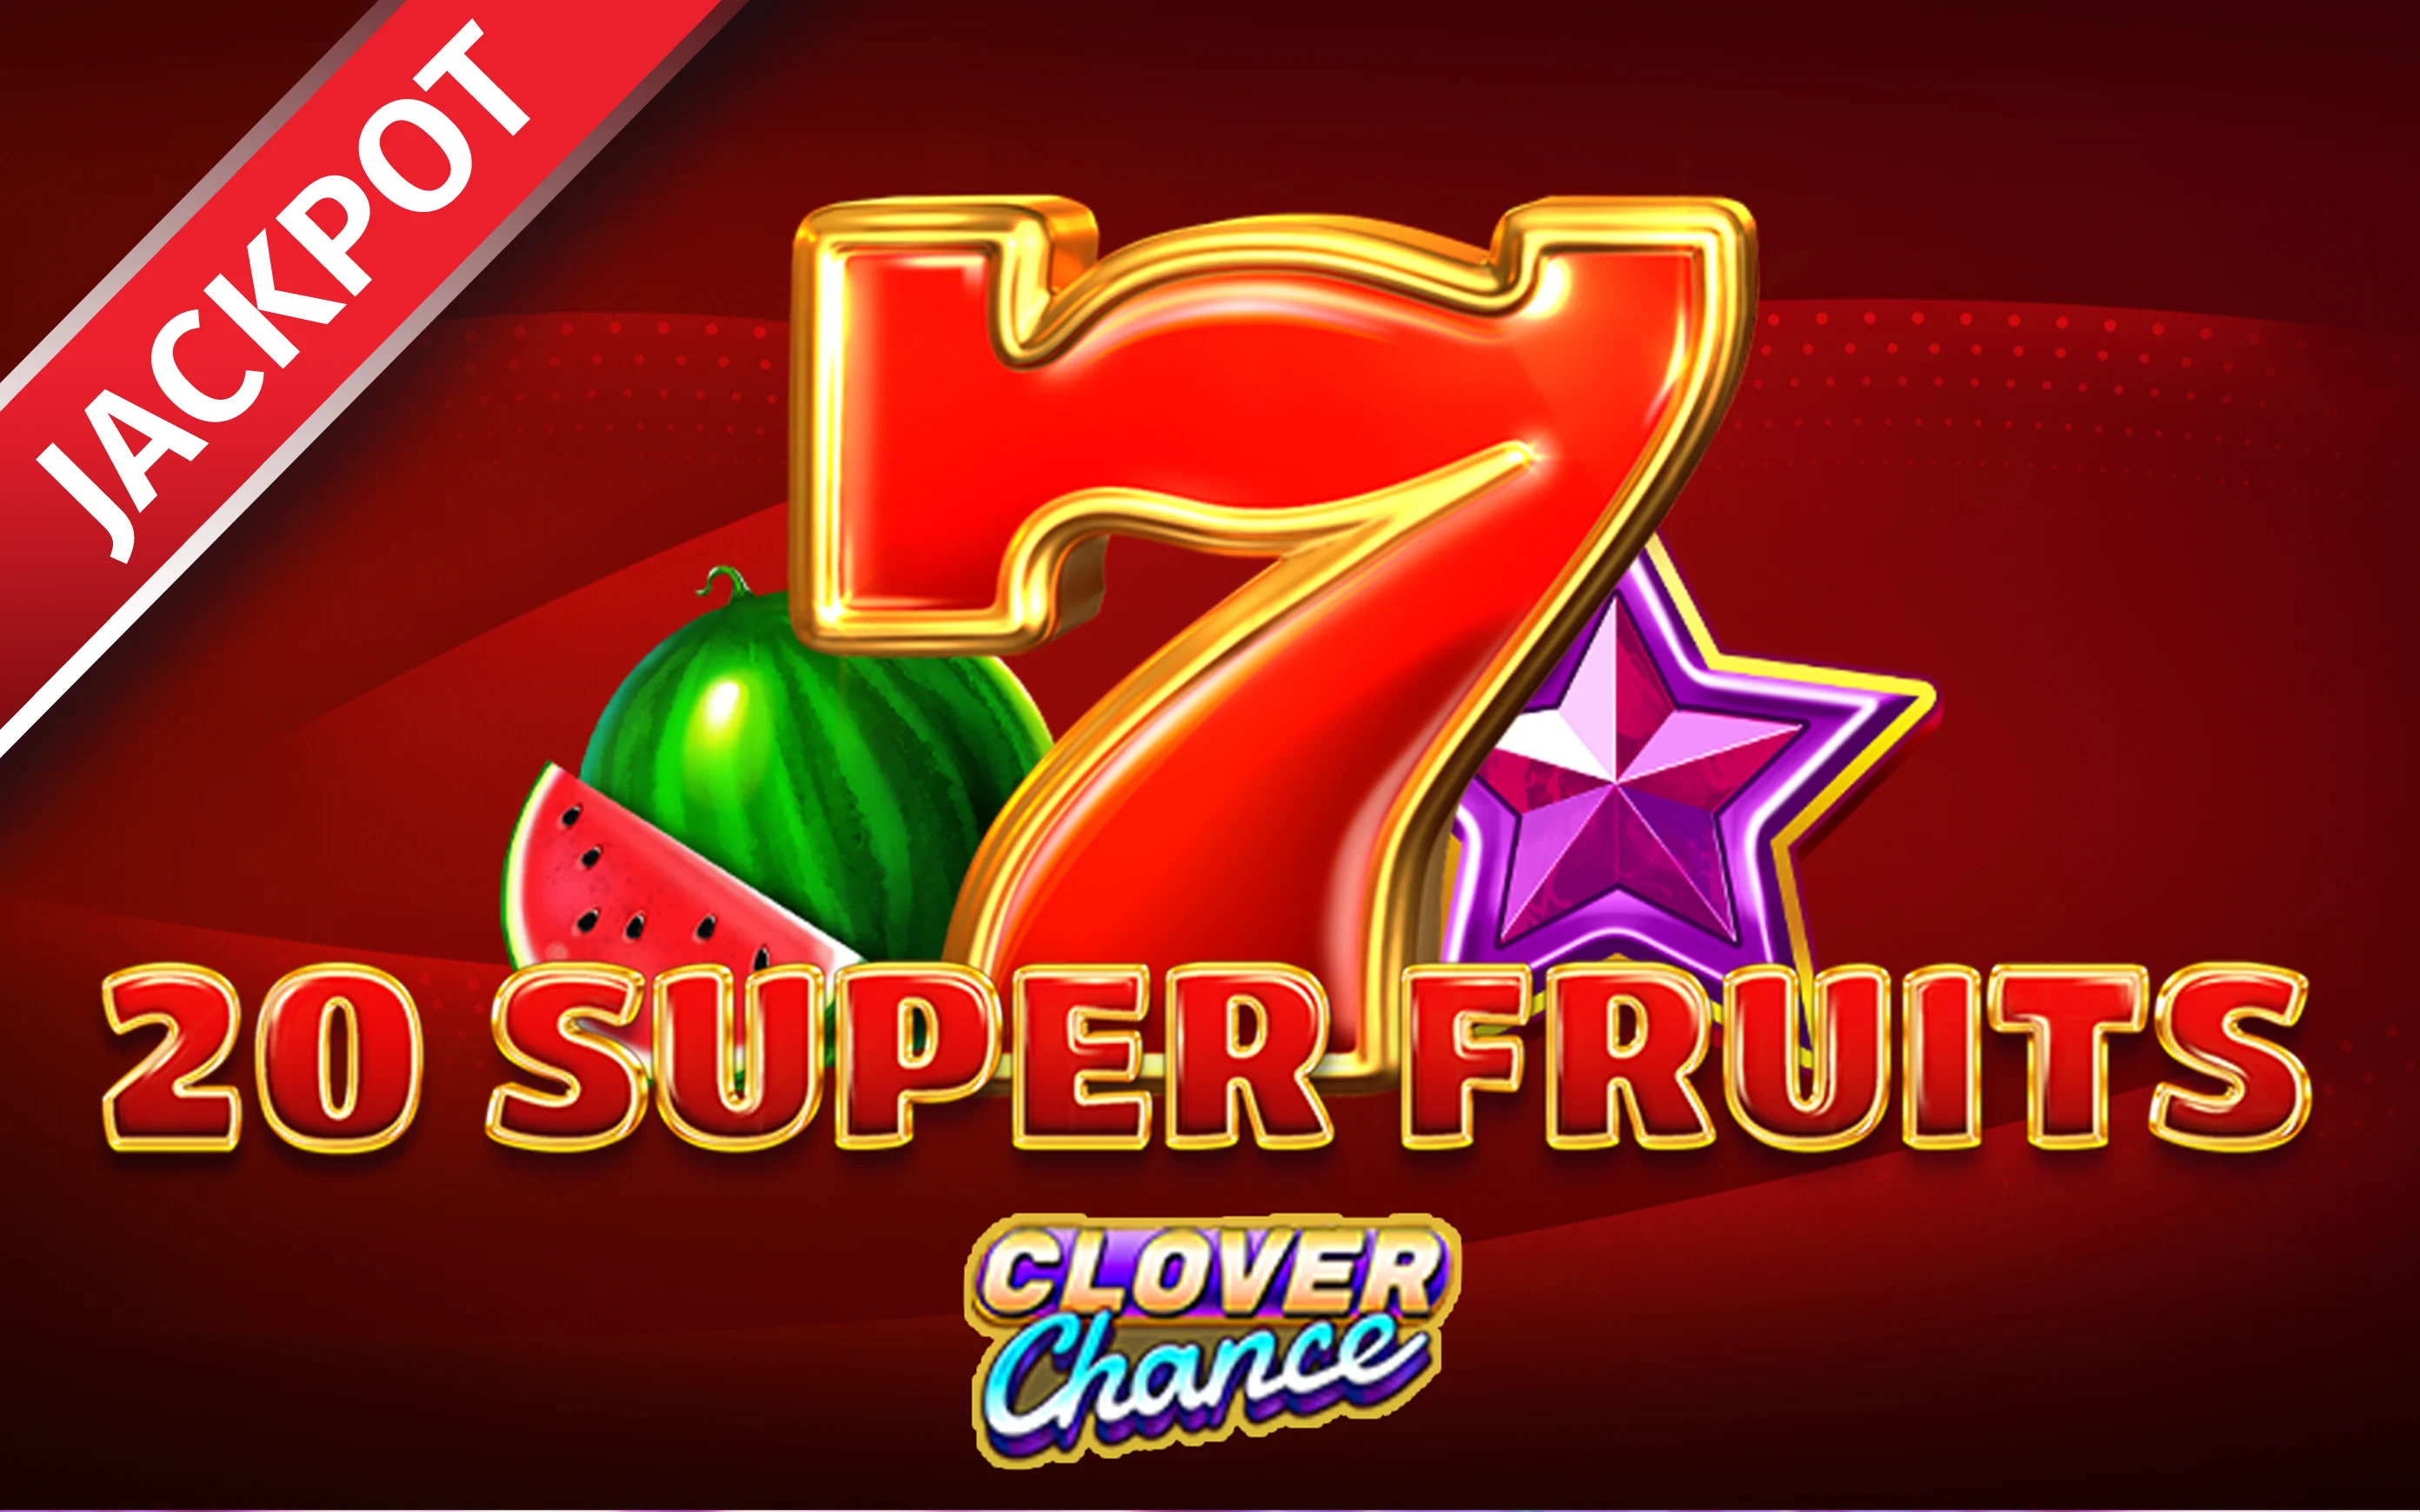 Play 20 Super Fruits Clover Chance on Starcasino.be online casino